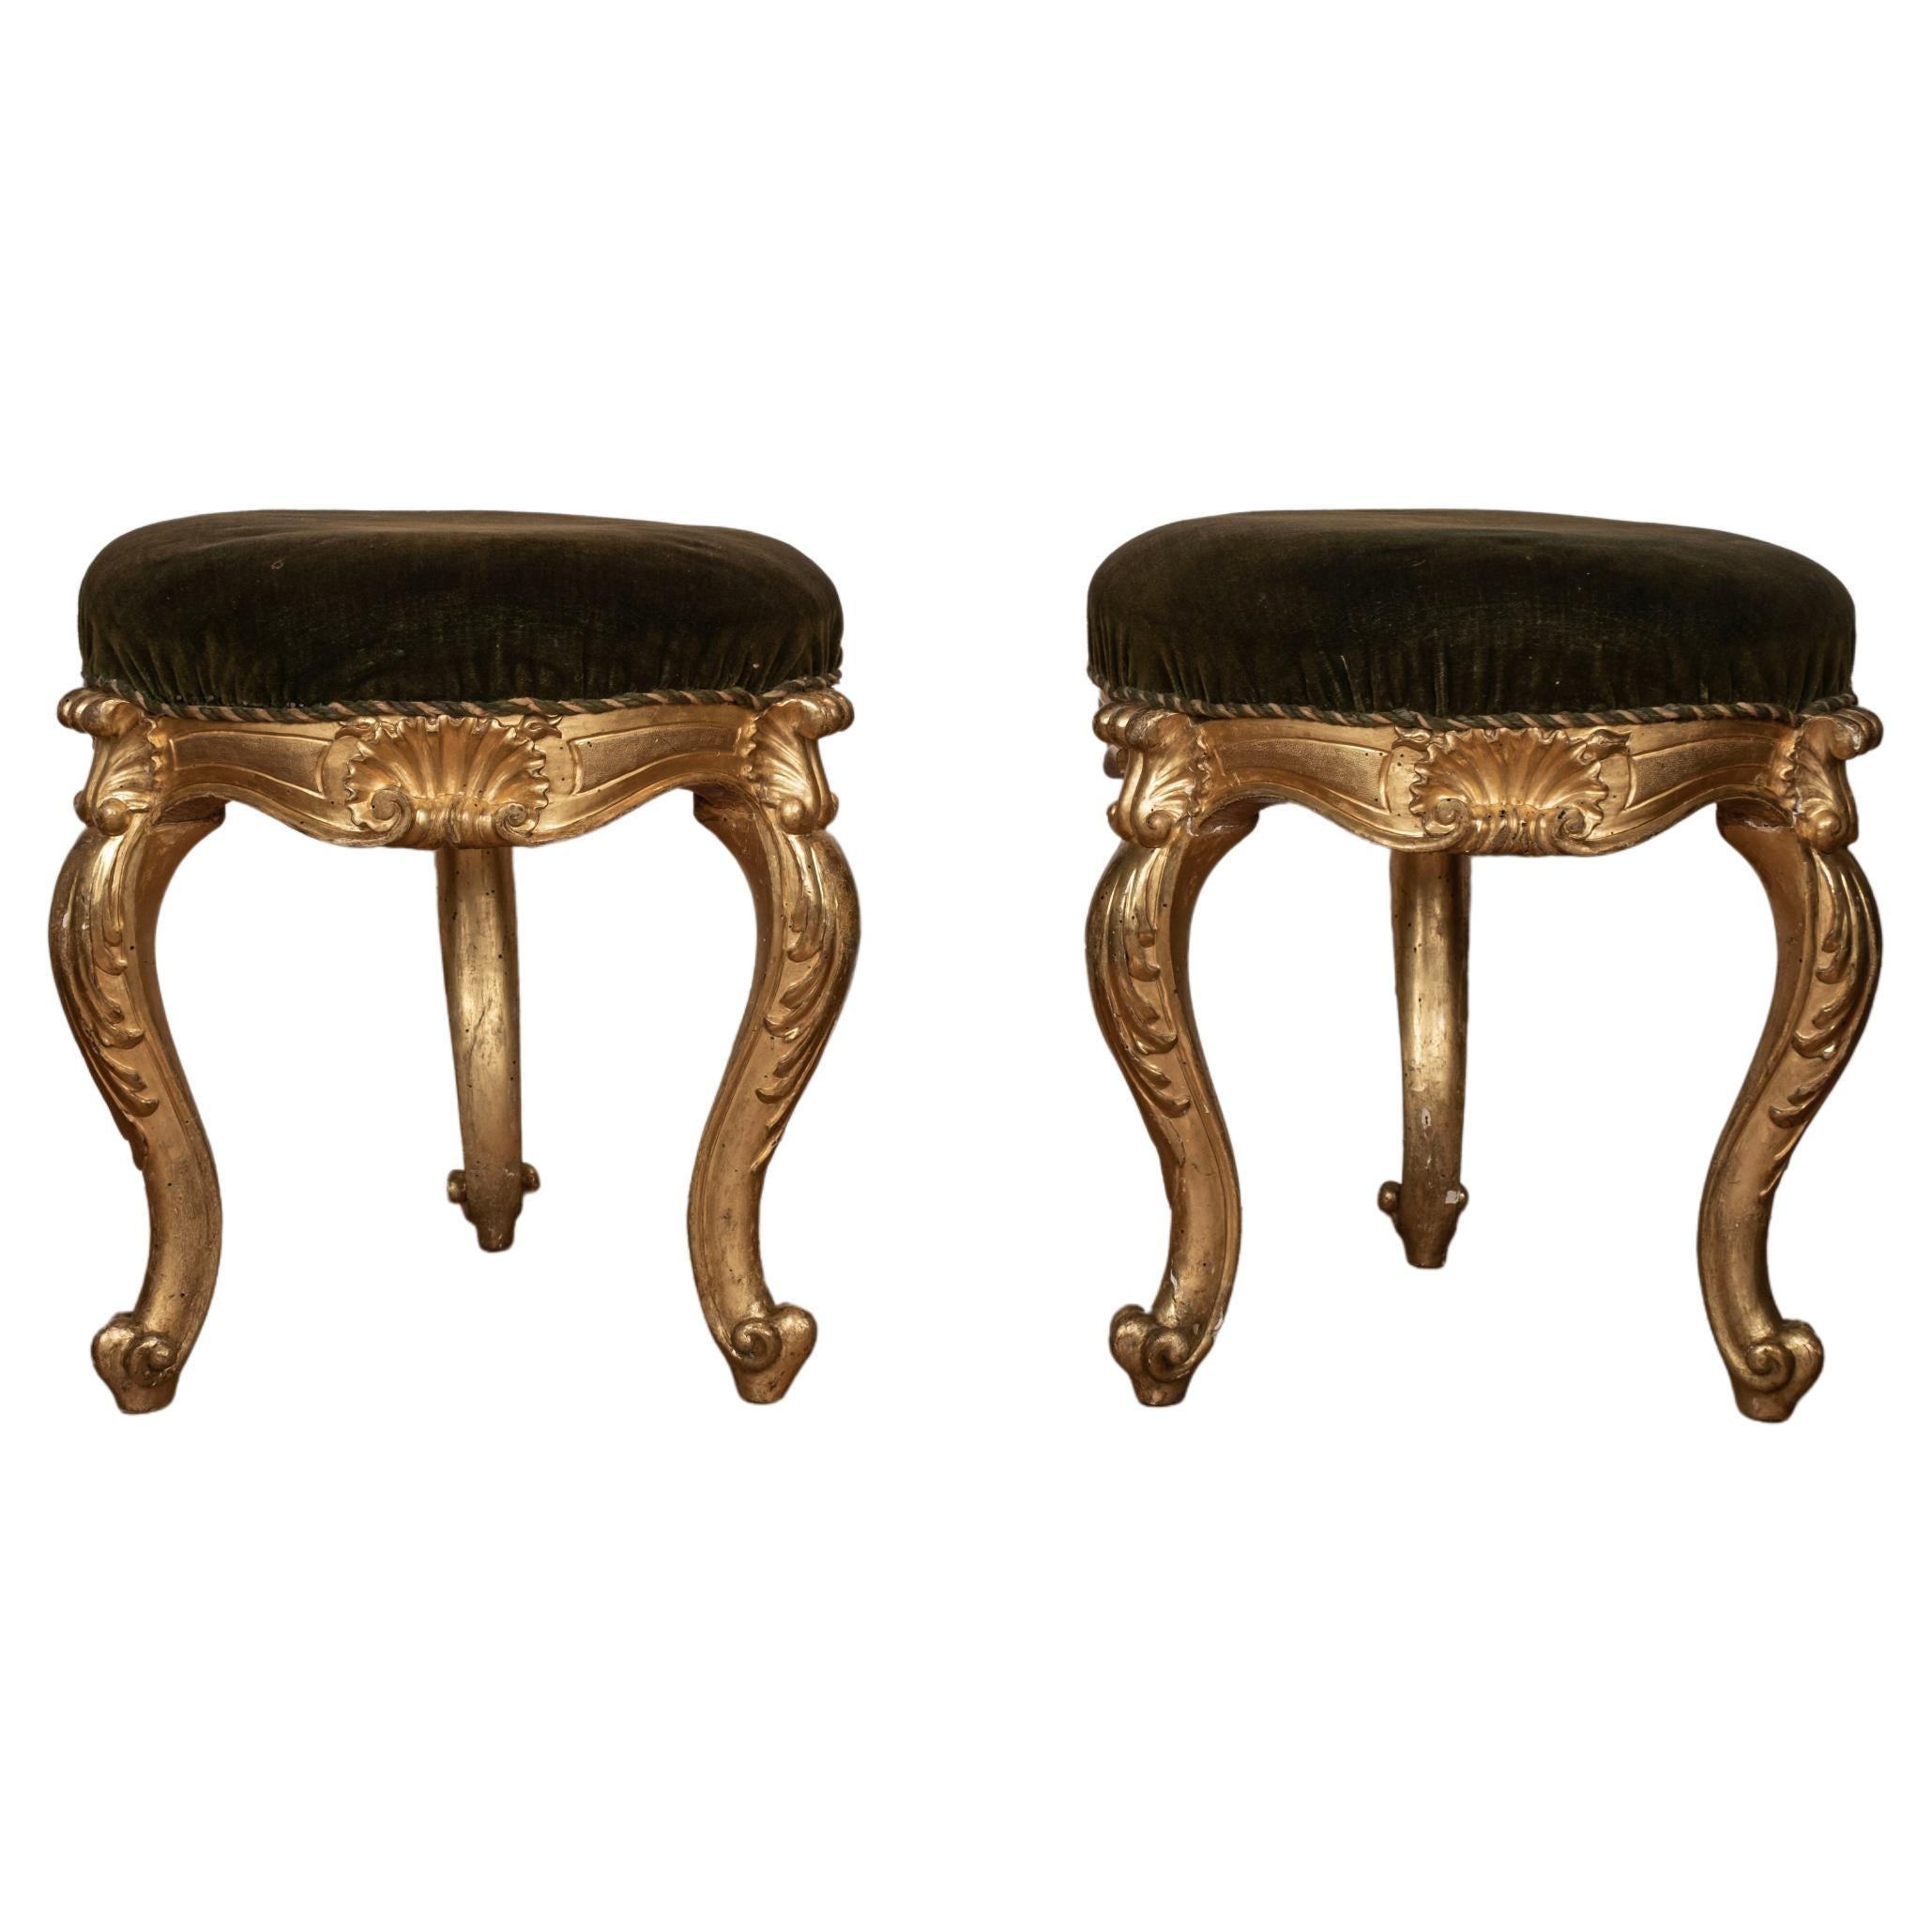 Pair of 19th Century Italian Regence Style Giltwood Benches For Sale